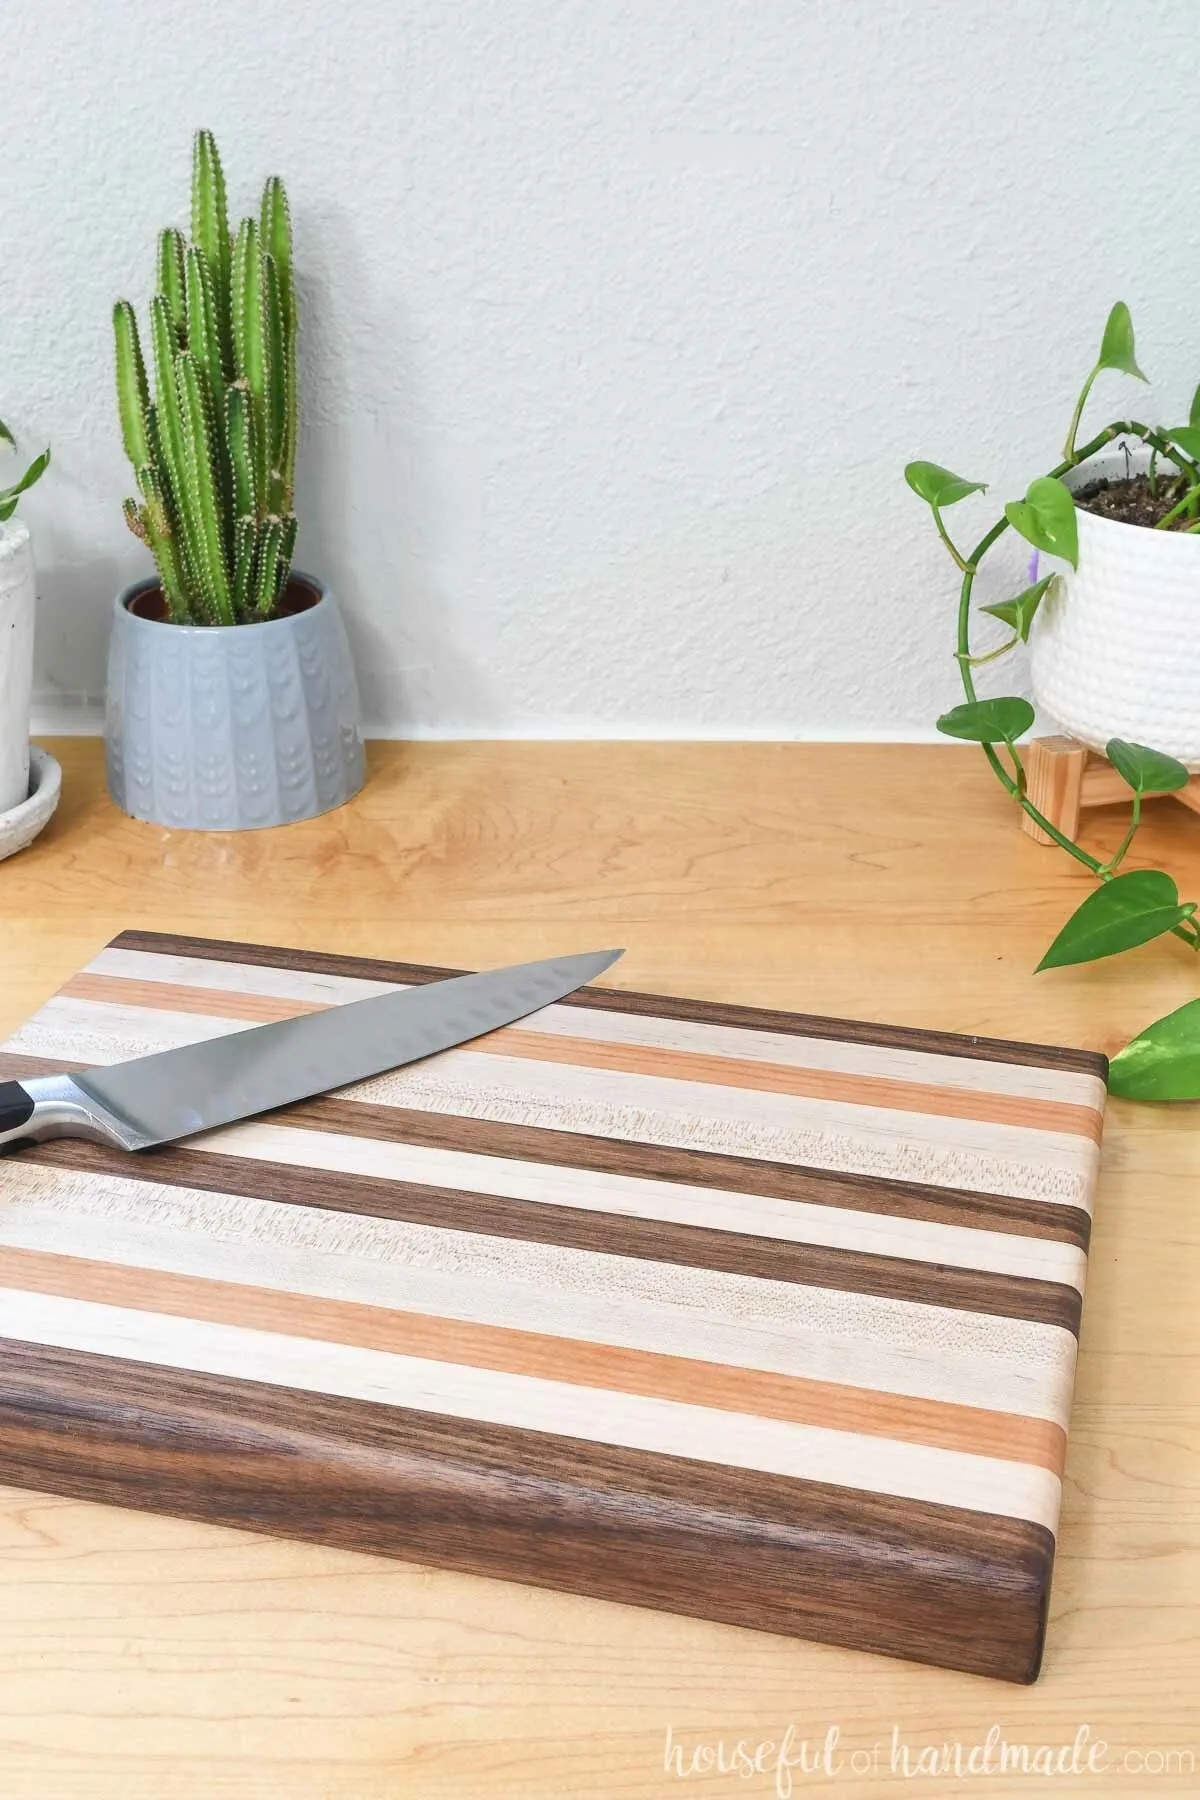 DIY edge grain cutting board made of walnut, maple, and cherry 1x2 boards and no big tools. 